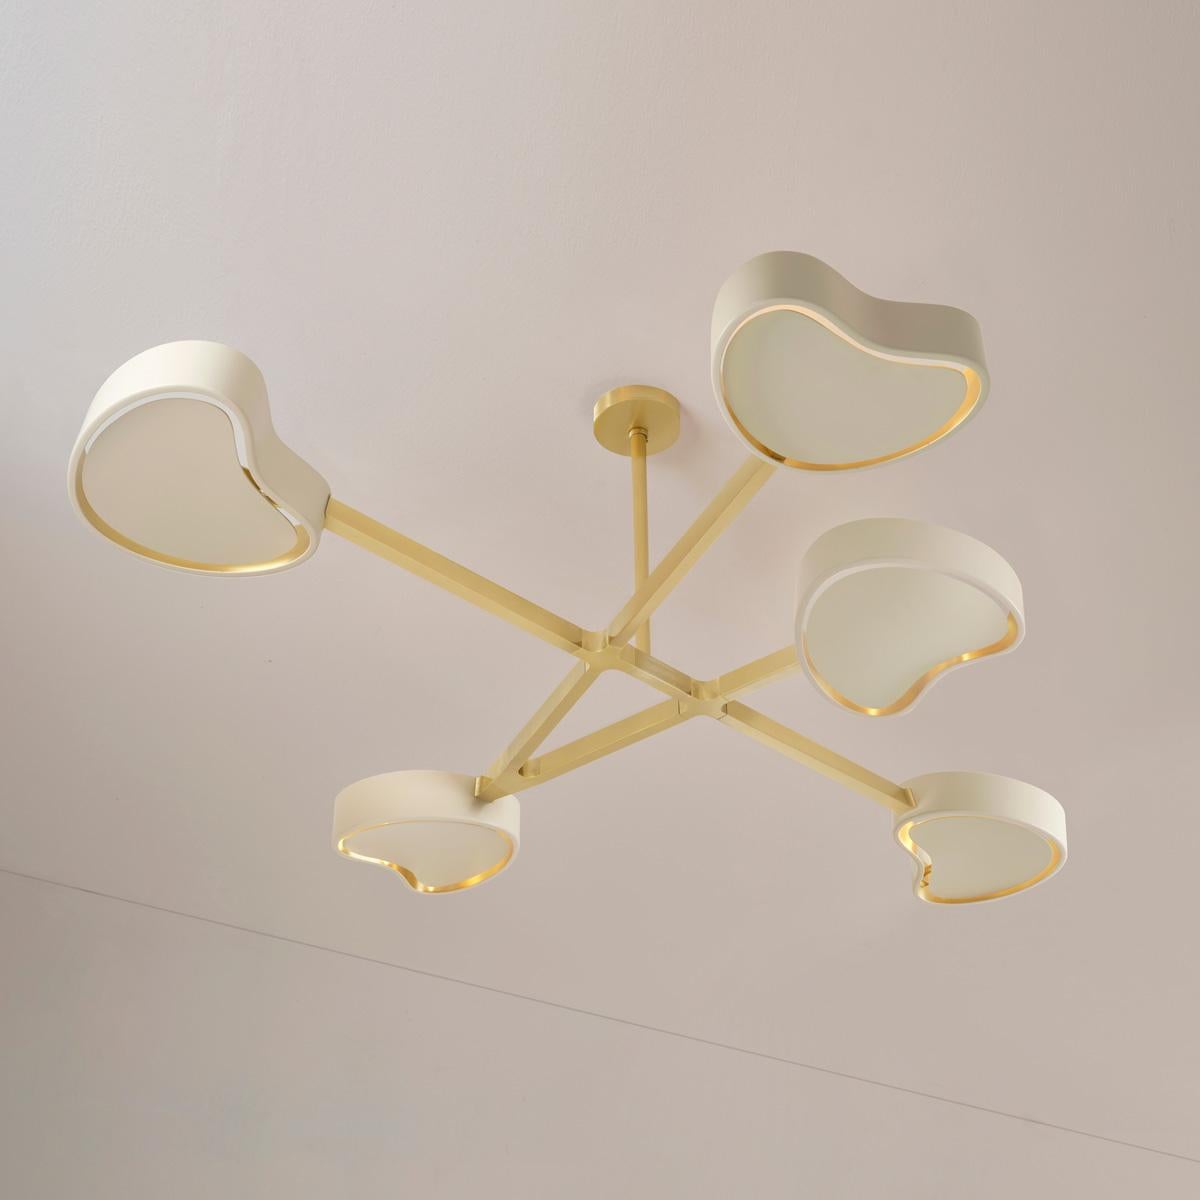 Cuore N.5 Ceiling Light by Gaspare Asaro. Peltro and Bronze Finish For Sale 2